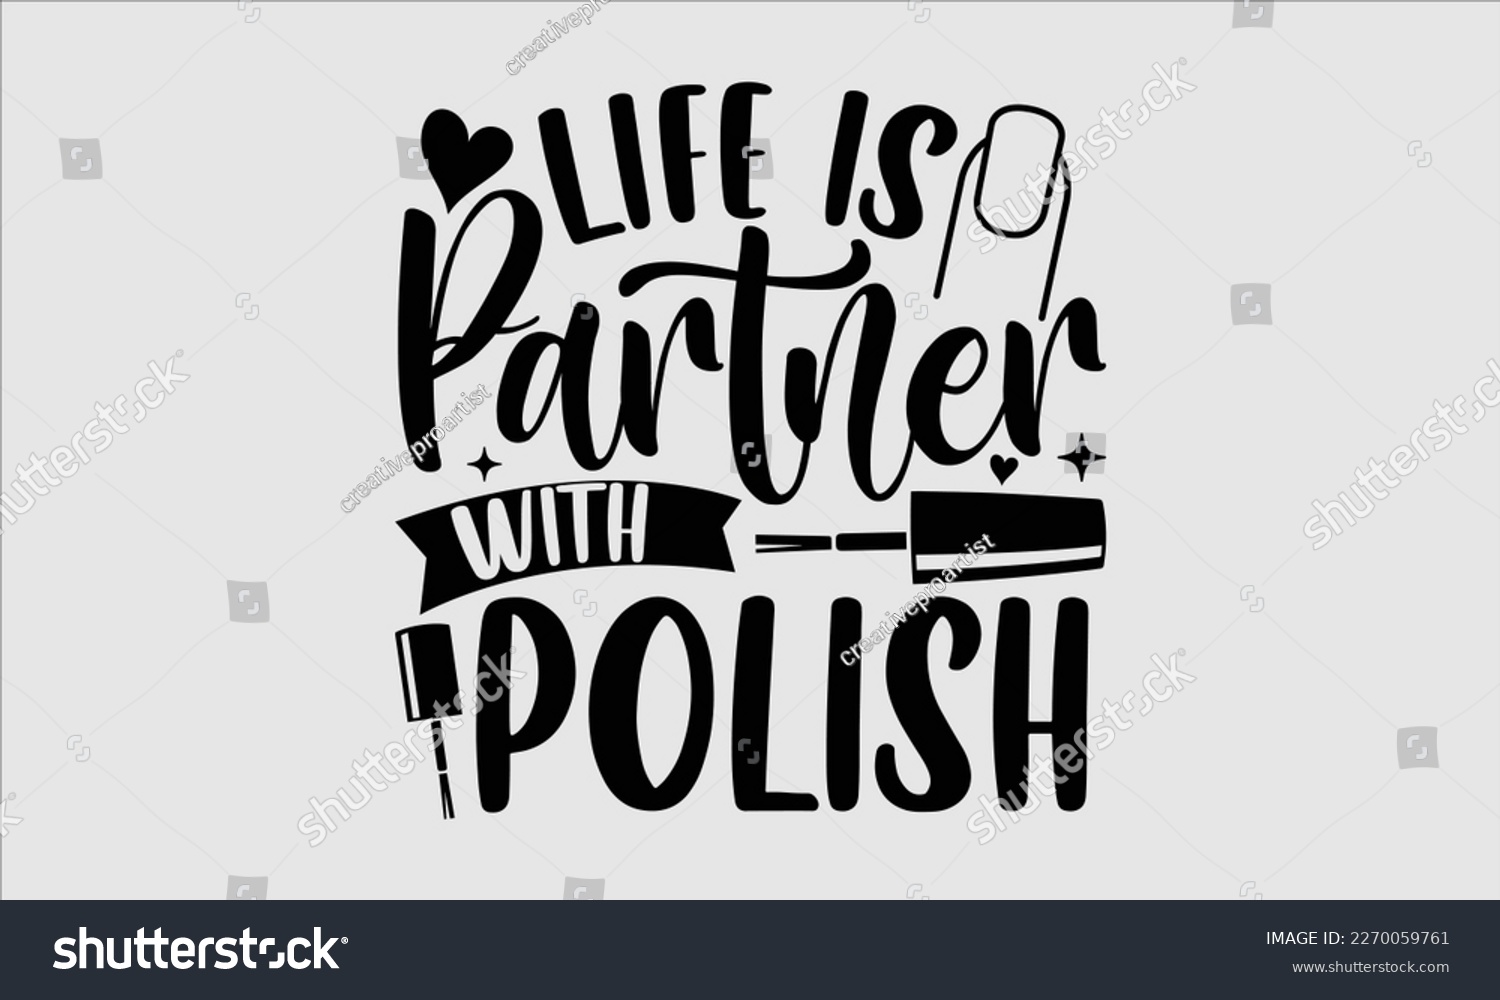 SVG of Life is partner with polish- Nail Tech t shirts design, Hand written lettering phrase, Isolated on white background,  Calligraphy graphic for Cutting Machine, svg eps 10. svg